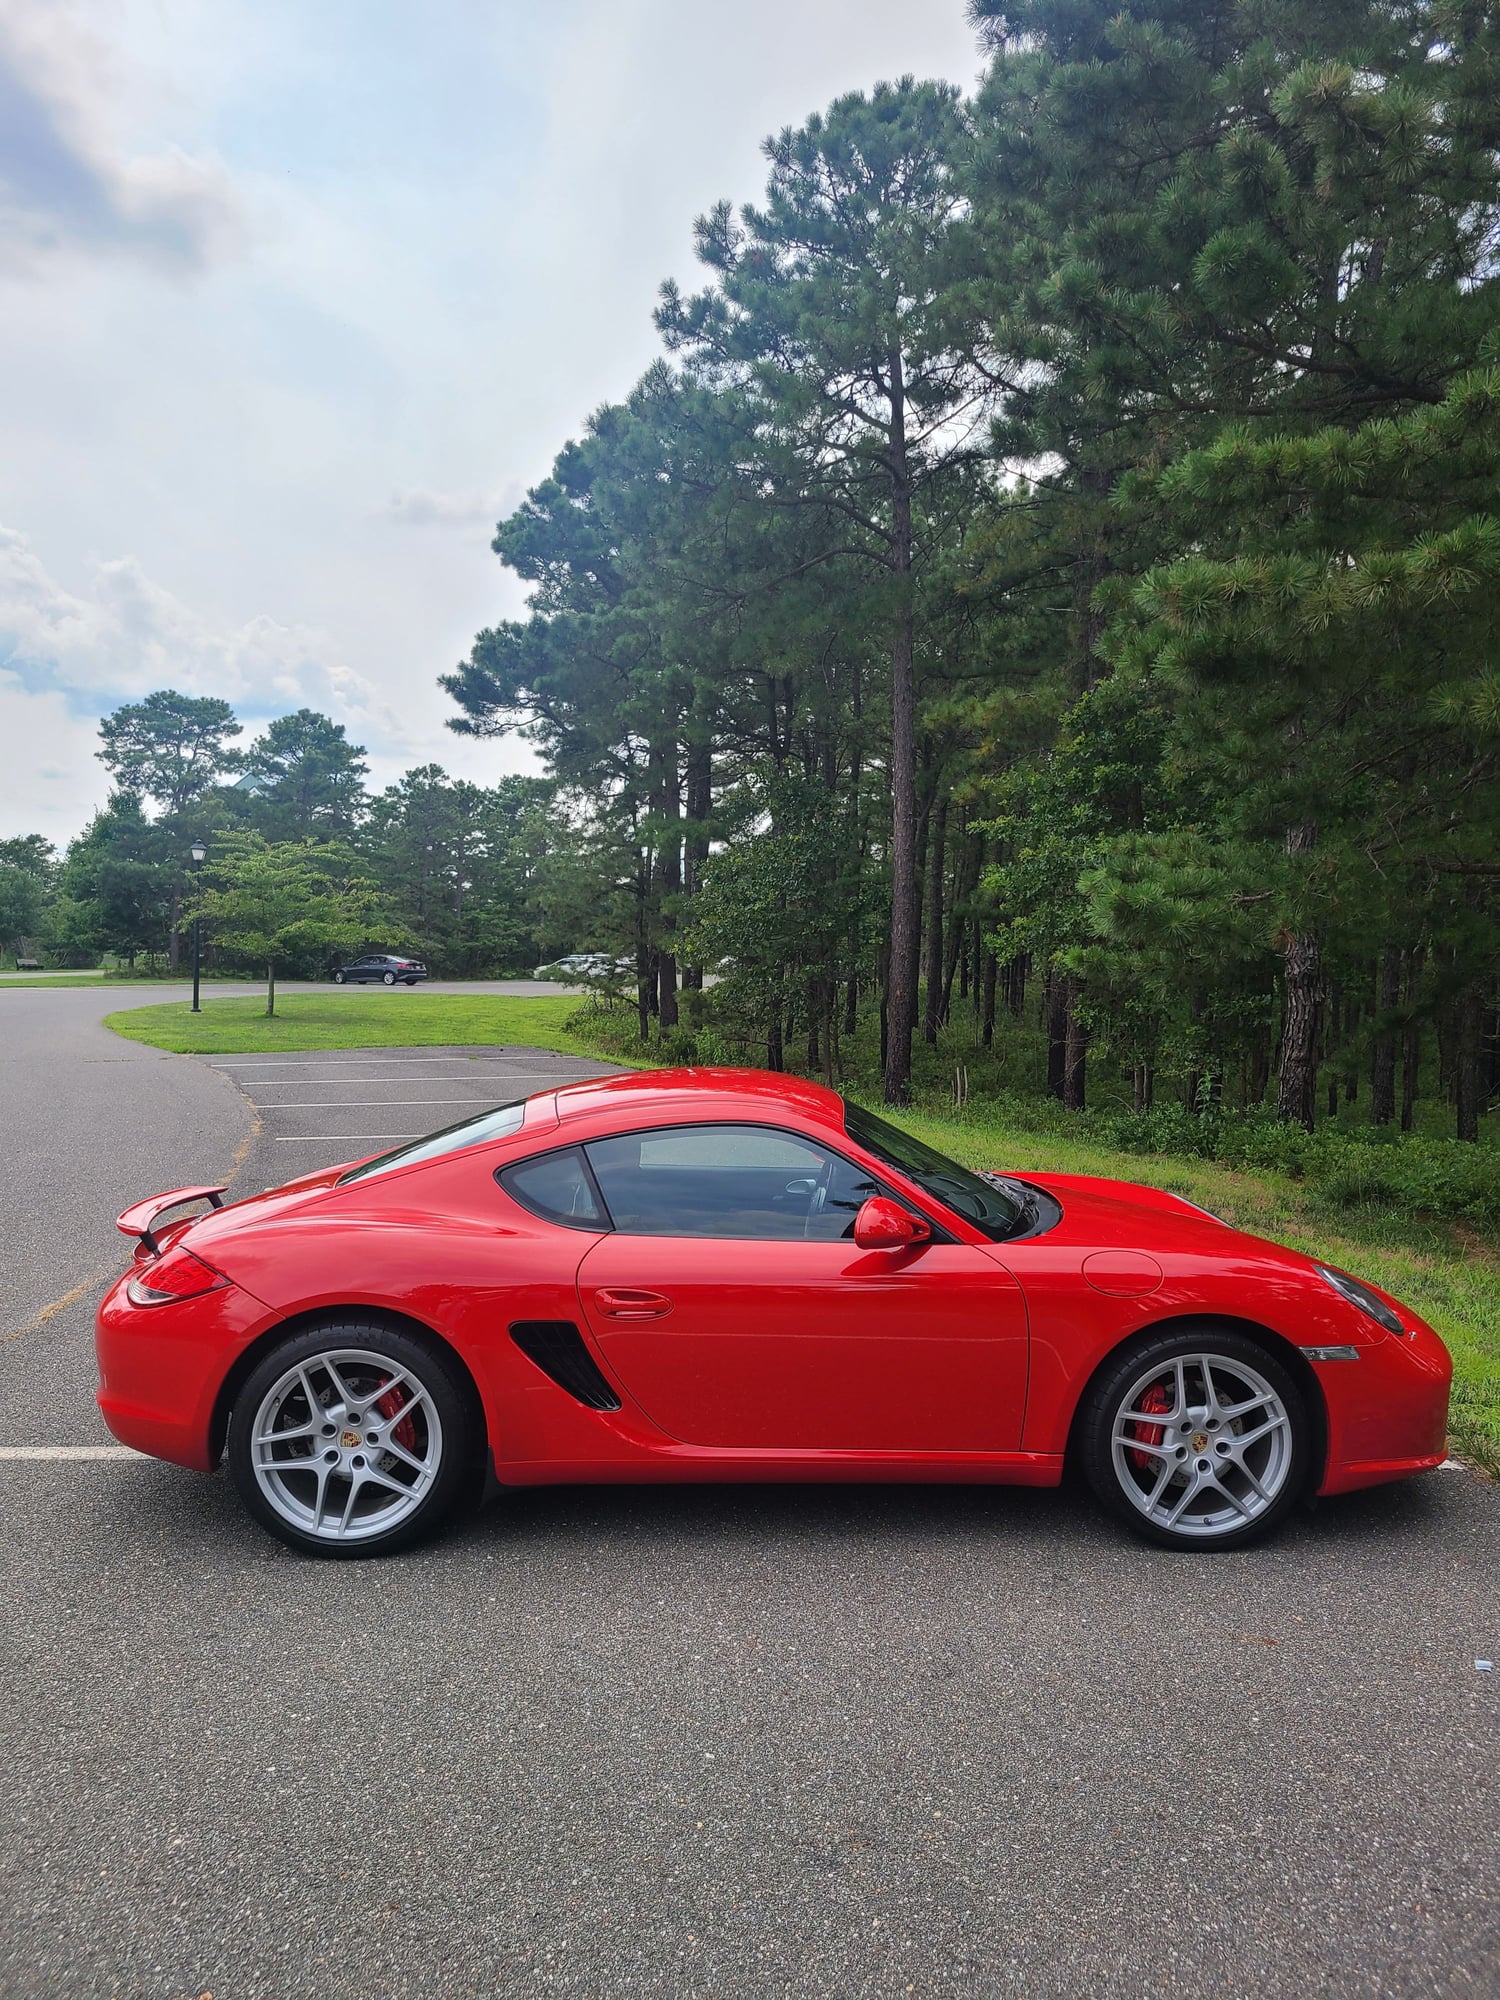 2010 Porsche Cayman - 2010 Cayman S 6MT *Lots* of extras - Used - VIN wp0ab2a84au780710 - 50,569 Miles - 6 cyl - 2WD - Manual - Coupe - Red - Bayville, NJ 08721, United States